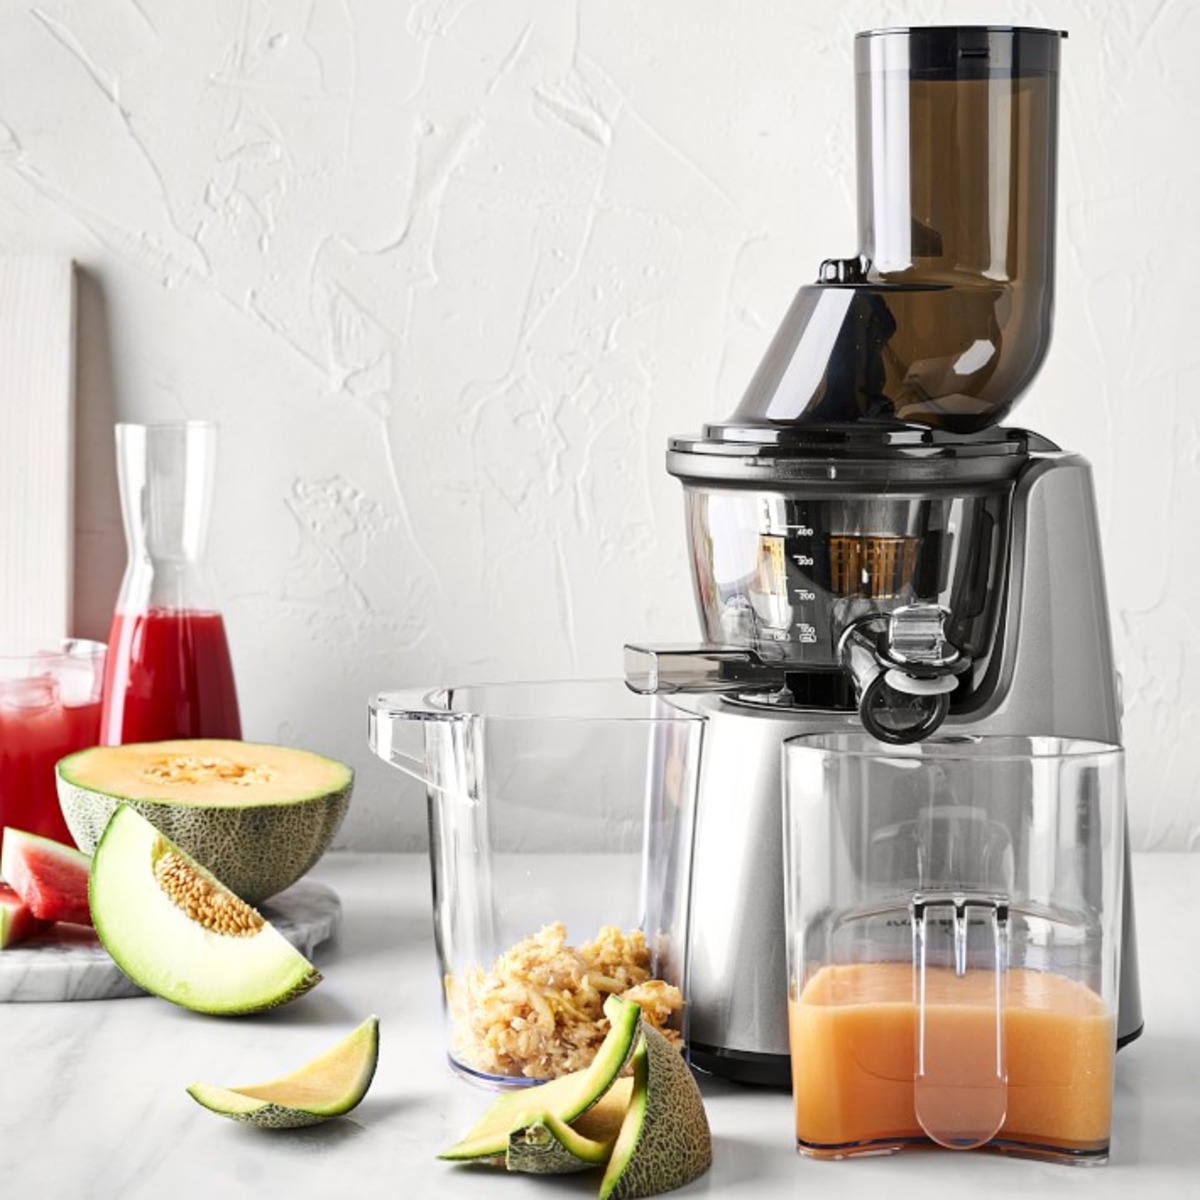 Slow Masticating Juicer, Aicook Cold Press Juicer Machine, Easy to Clean, Higher Juice Yield and Drier Pulp, Juice Extractor with Quiet Motor and